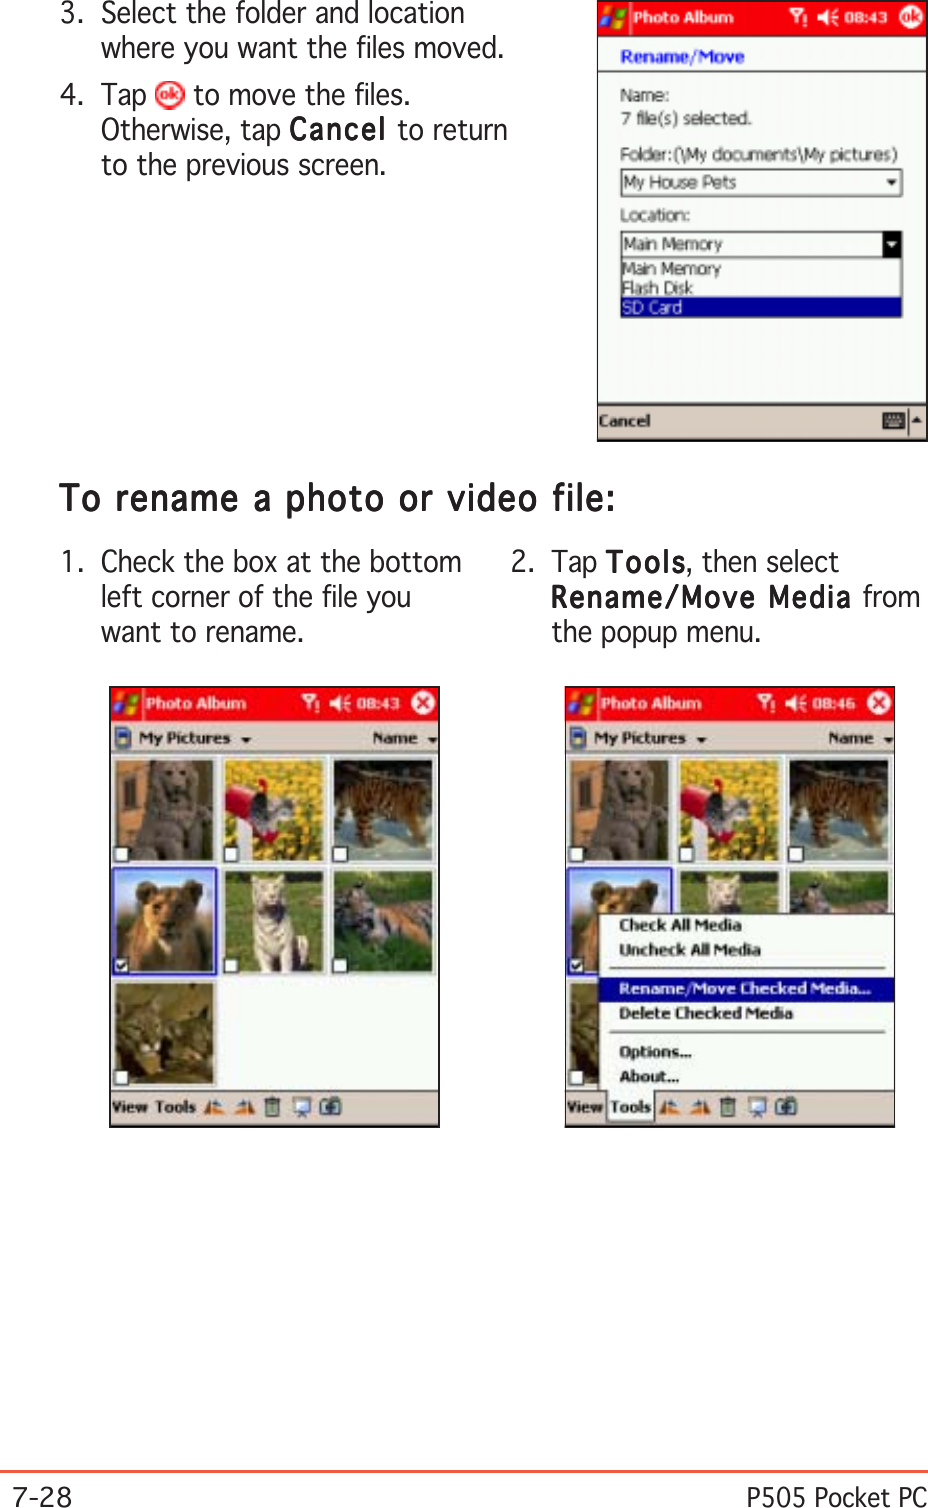 7-28P505 Pocket PC2. Tap ToolsToolsToolsToolsTo ols, then selectRename/Move Media Rename/Move Media Rename/Move Media Rename/Move Media Rename/Move Media fromthe popup menu.1. Check the box at the bottomleft corner of the file youwant to rename.To rename a photo or video file:To rename a photo or video file:To rename a photo or video file:To rename a photo or video file:To rename a photo or video file:3. Select the folder and locationwhere you want the files moved.4. Tap   to move the files.Otherwise, tap CancelCancelCancelCancelCancel to returnto the previous screen.